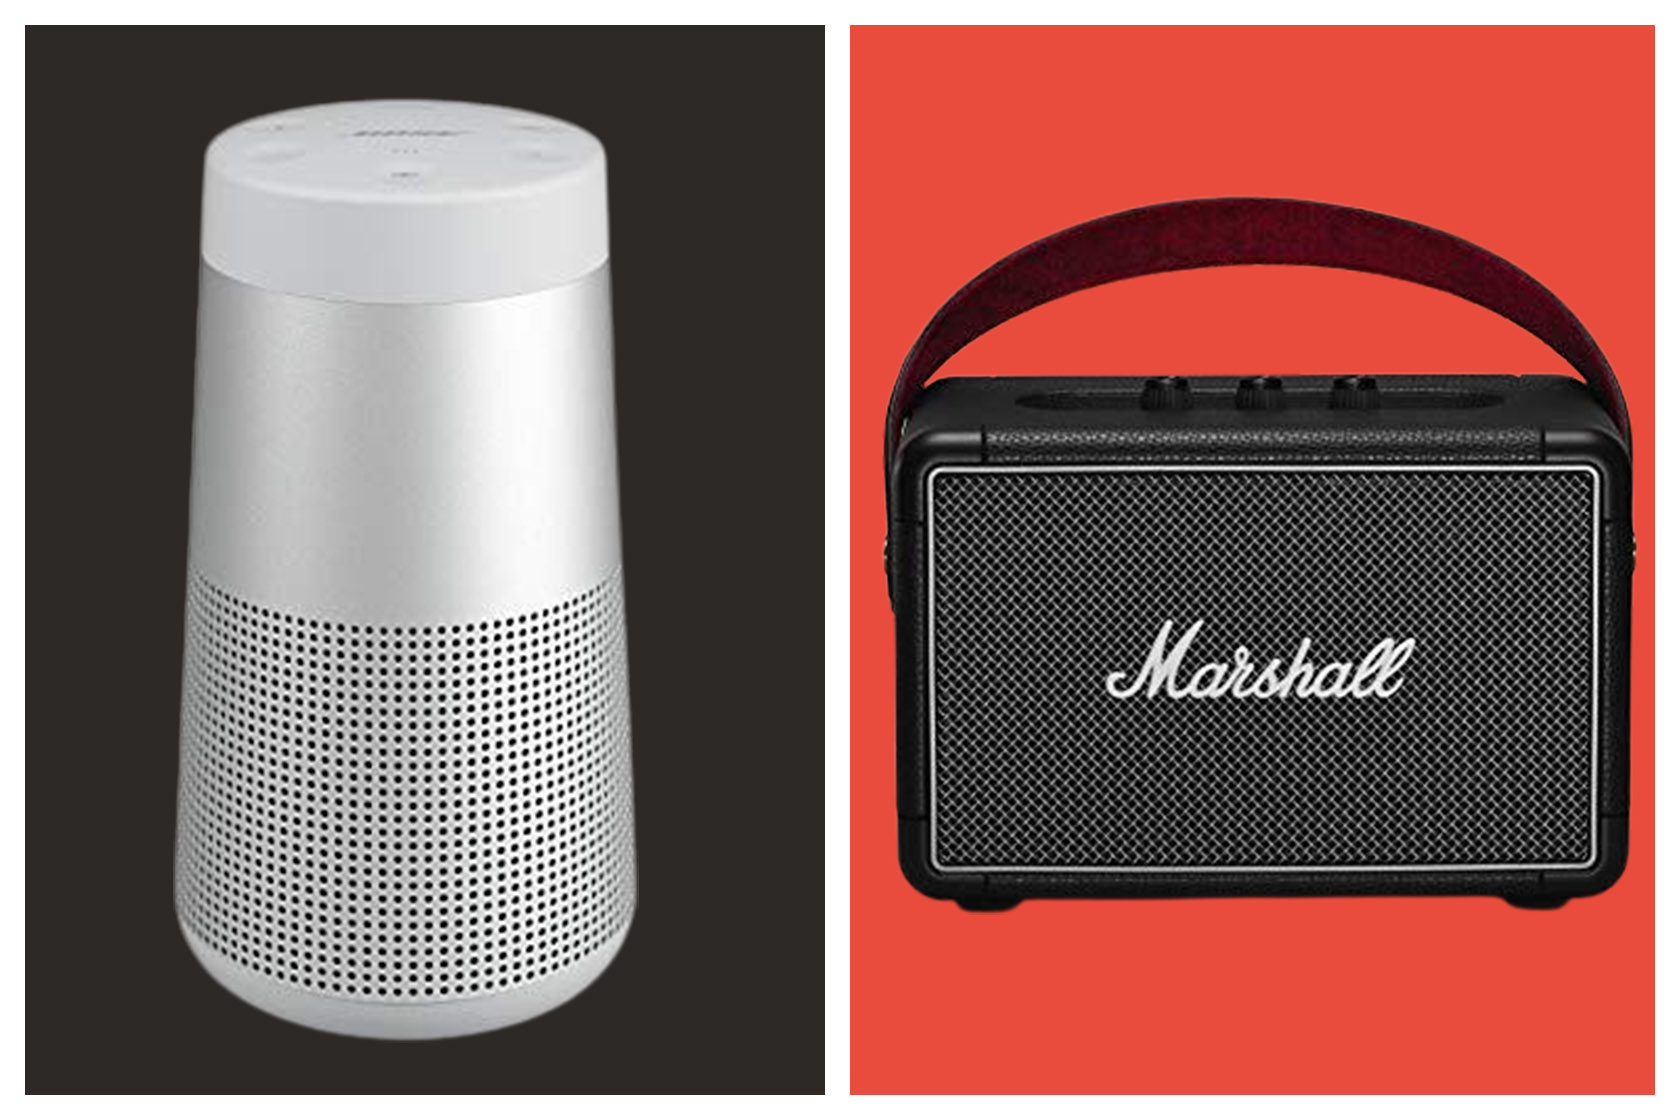 Marshall vs. bluetooth Which is best for your needs?